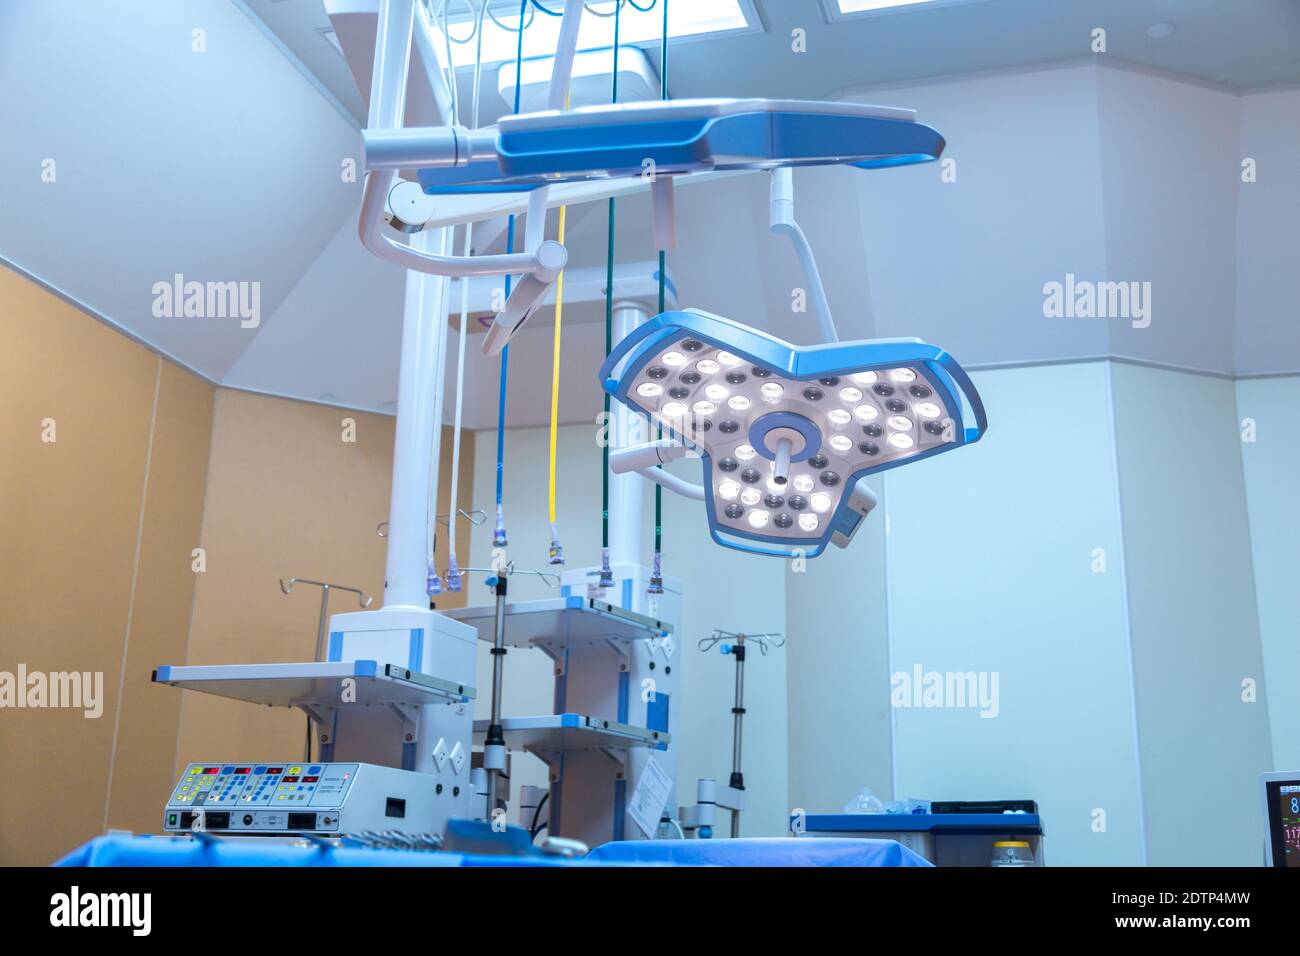 Equipment And Medical Devices In Modern Operating Room. Stock Photo